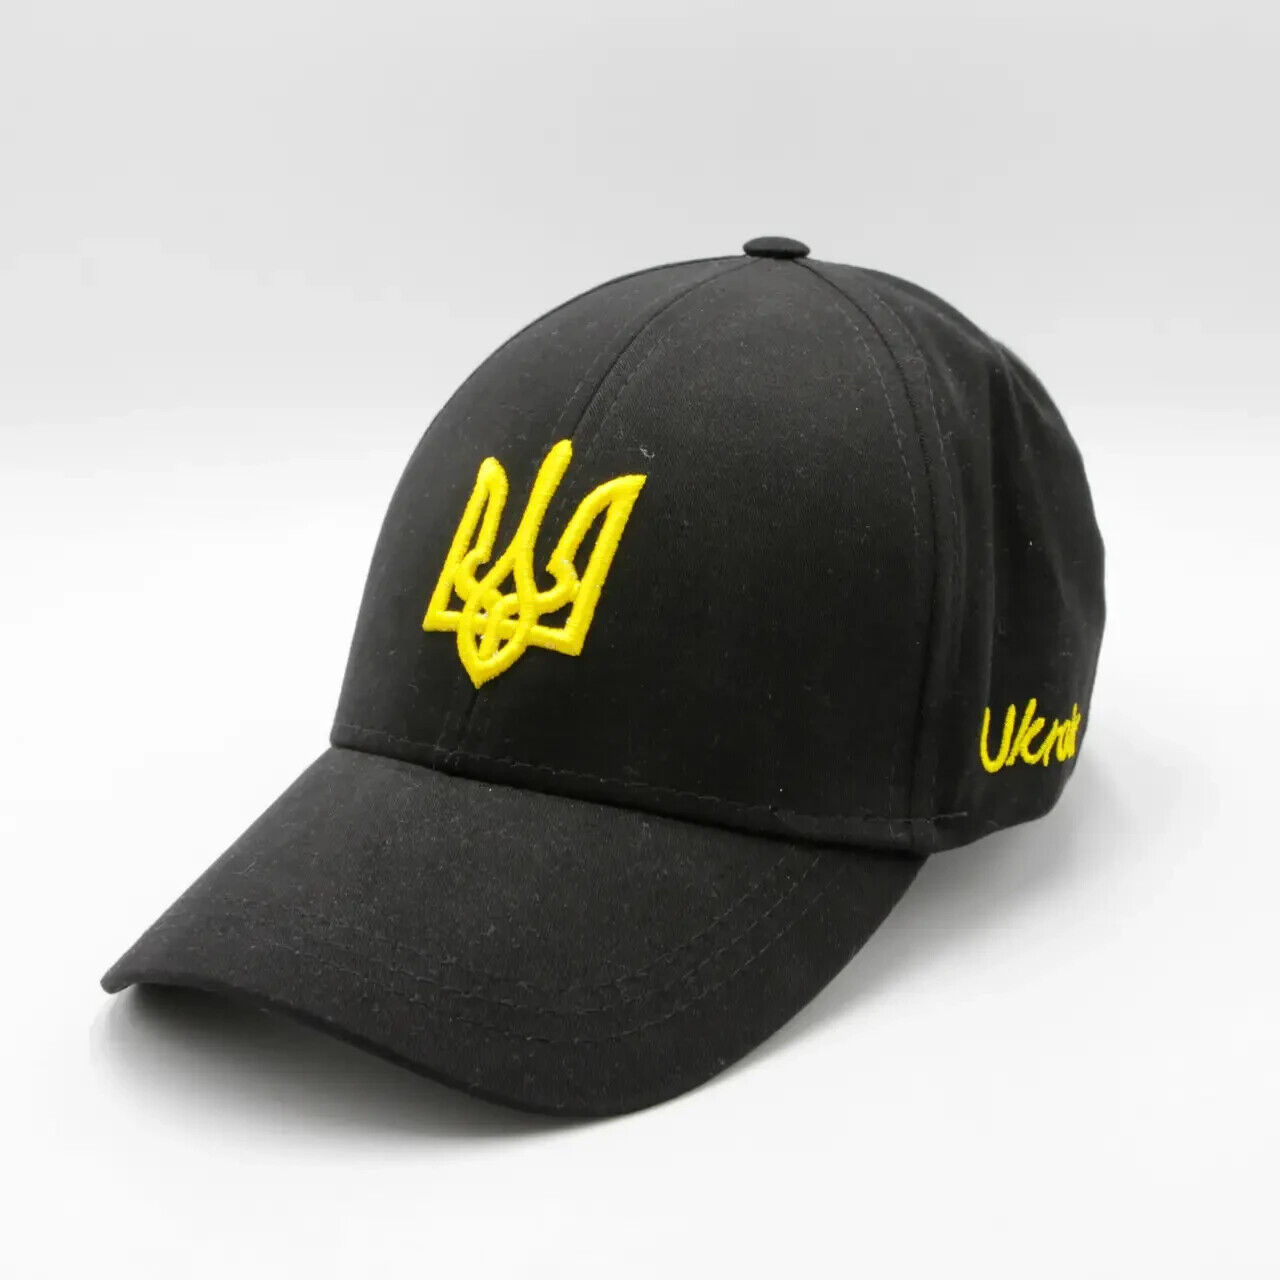 Baseball with a yellow Trident, cap for summer size 58, black baseball cap with